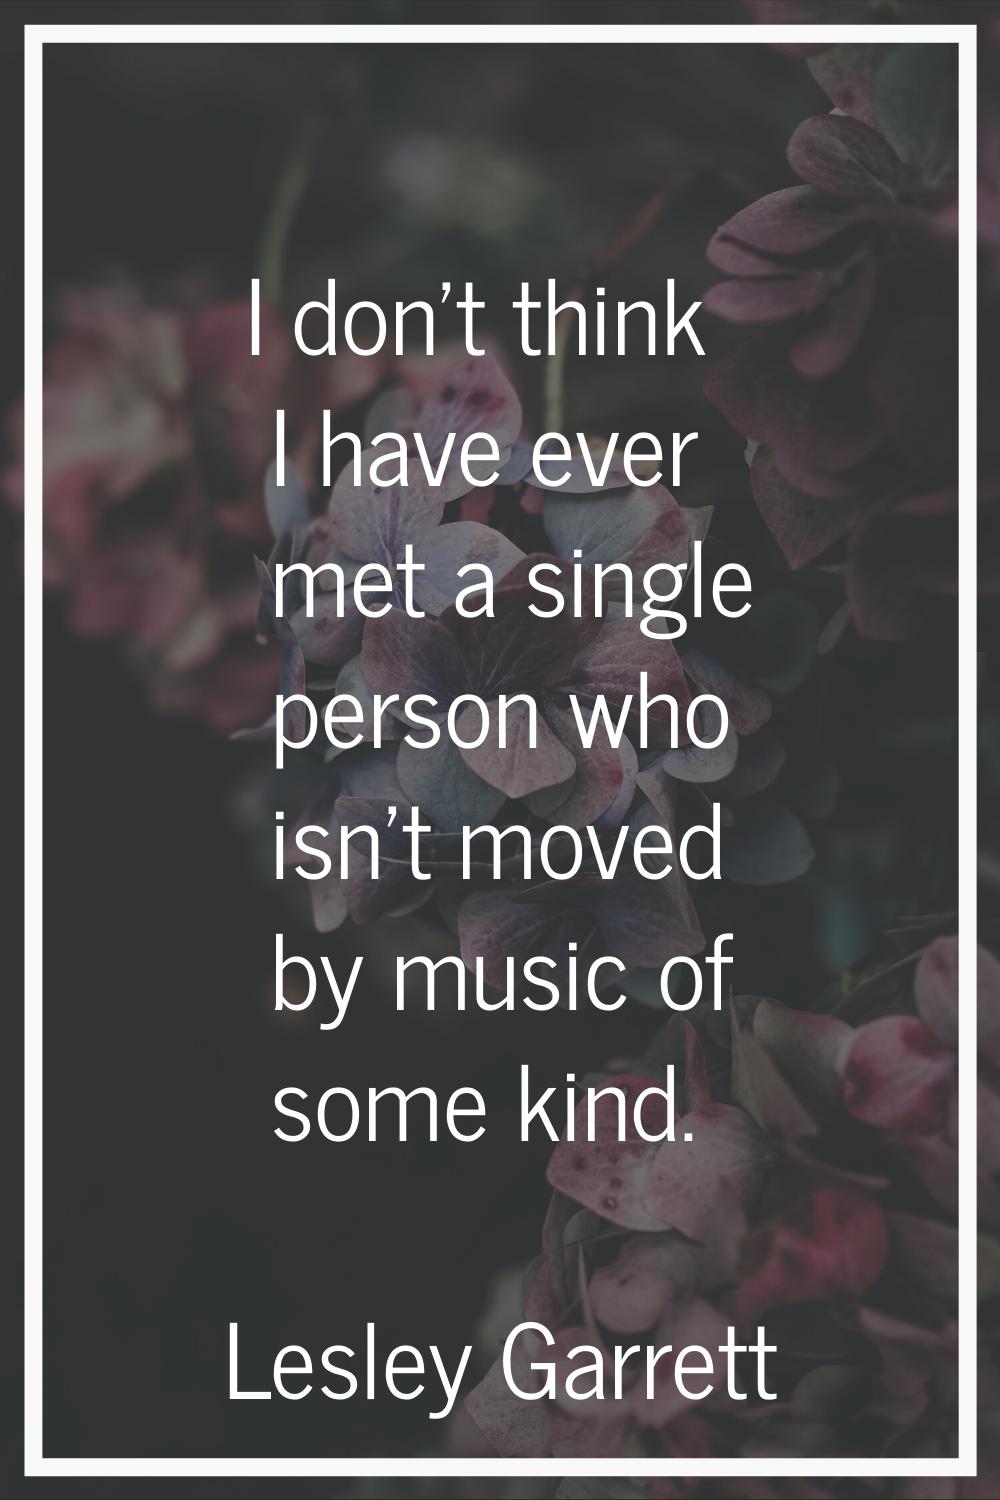 I don't think I have ever met a single person who isn't moved by music of some kind.